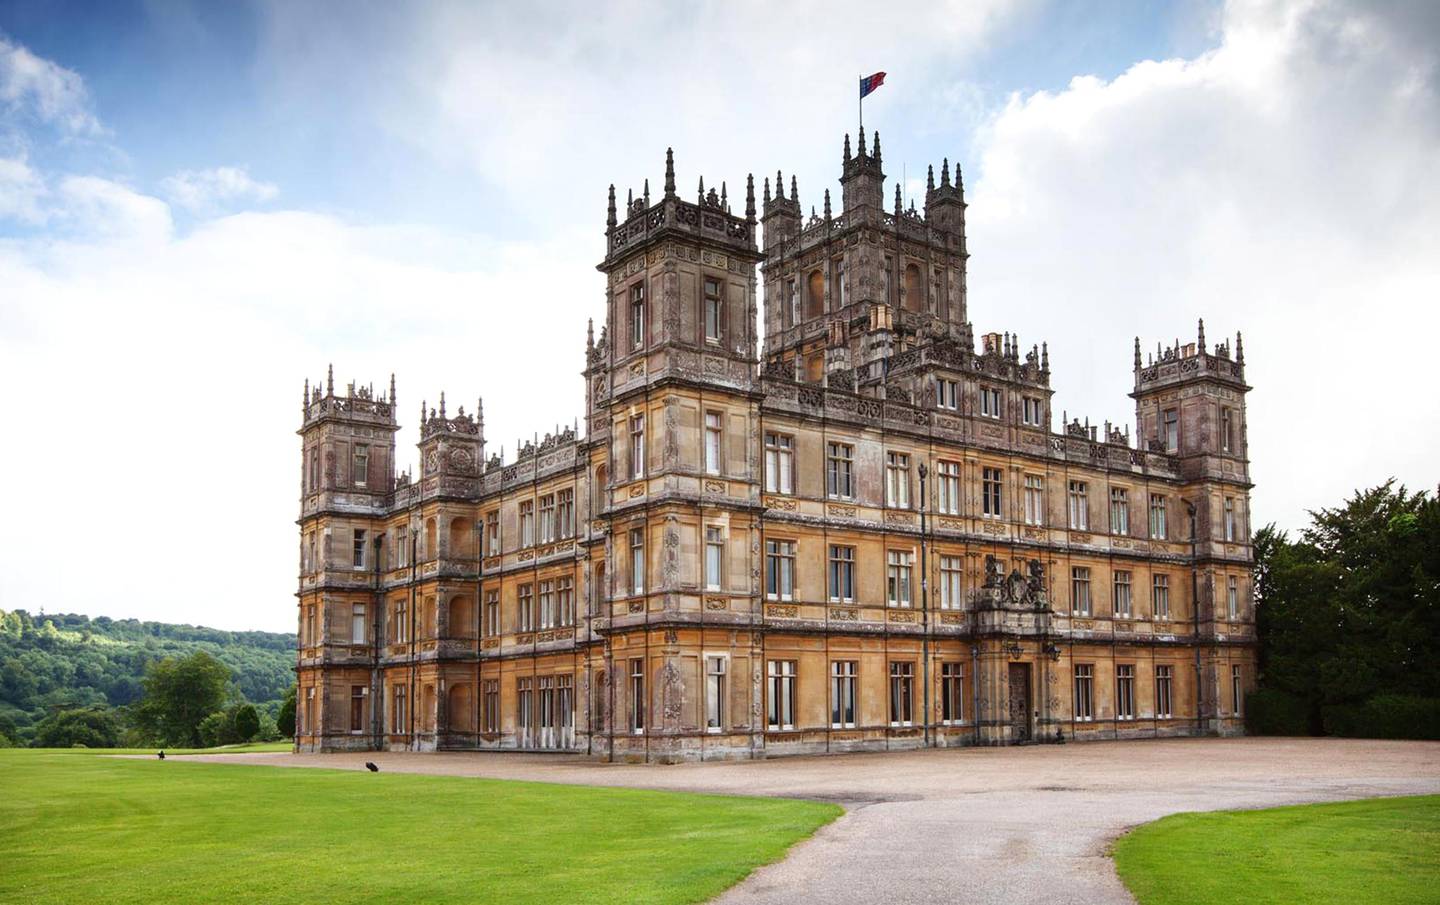 highclere castle, where downton abbey is filmed, for a story on a visit there being auctioned at the DIFF charity fundraiser, Dec. 2013CREDIT: courtesy Burlison/DIFF